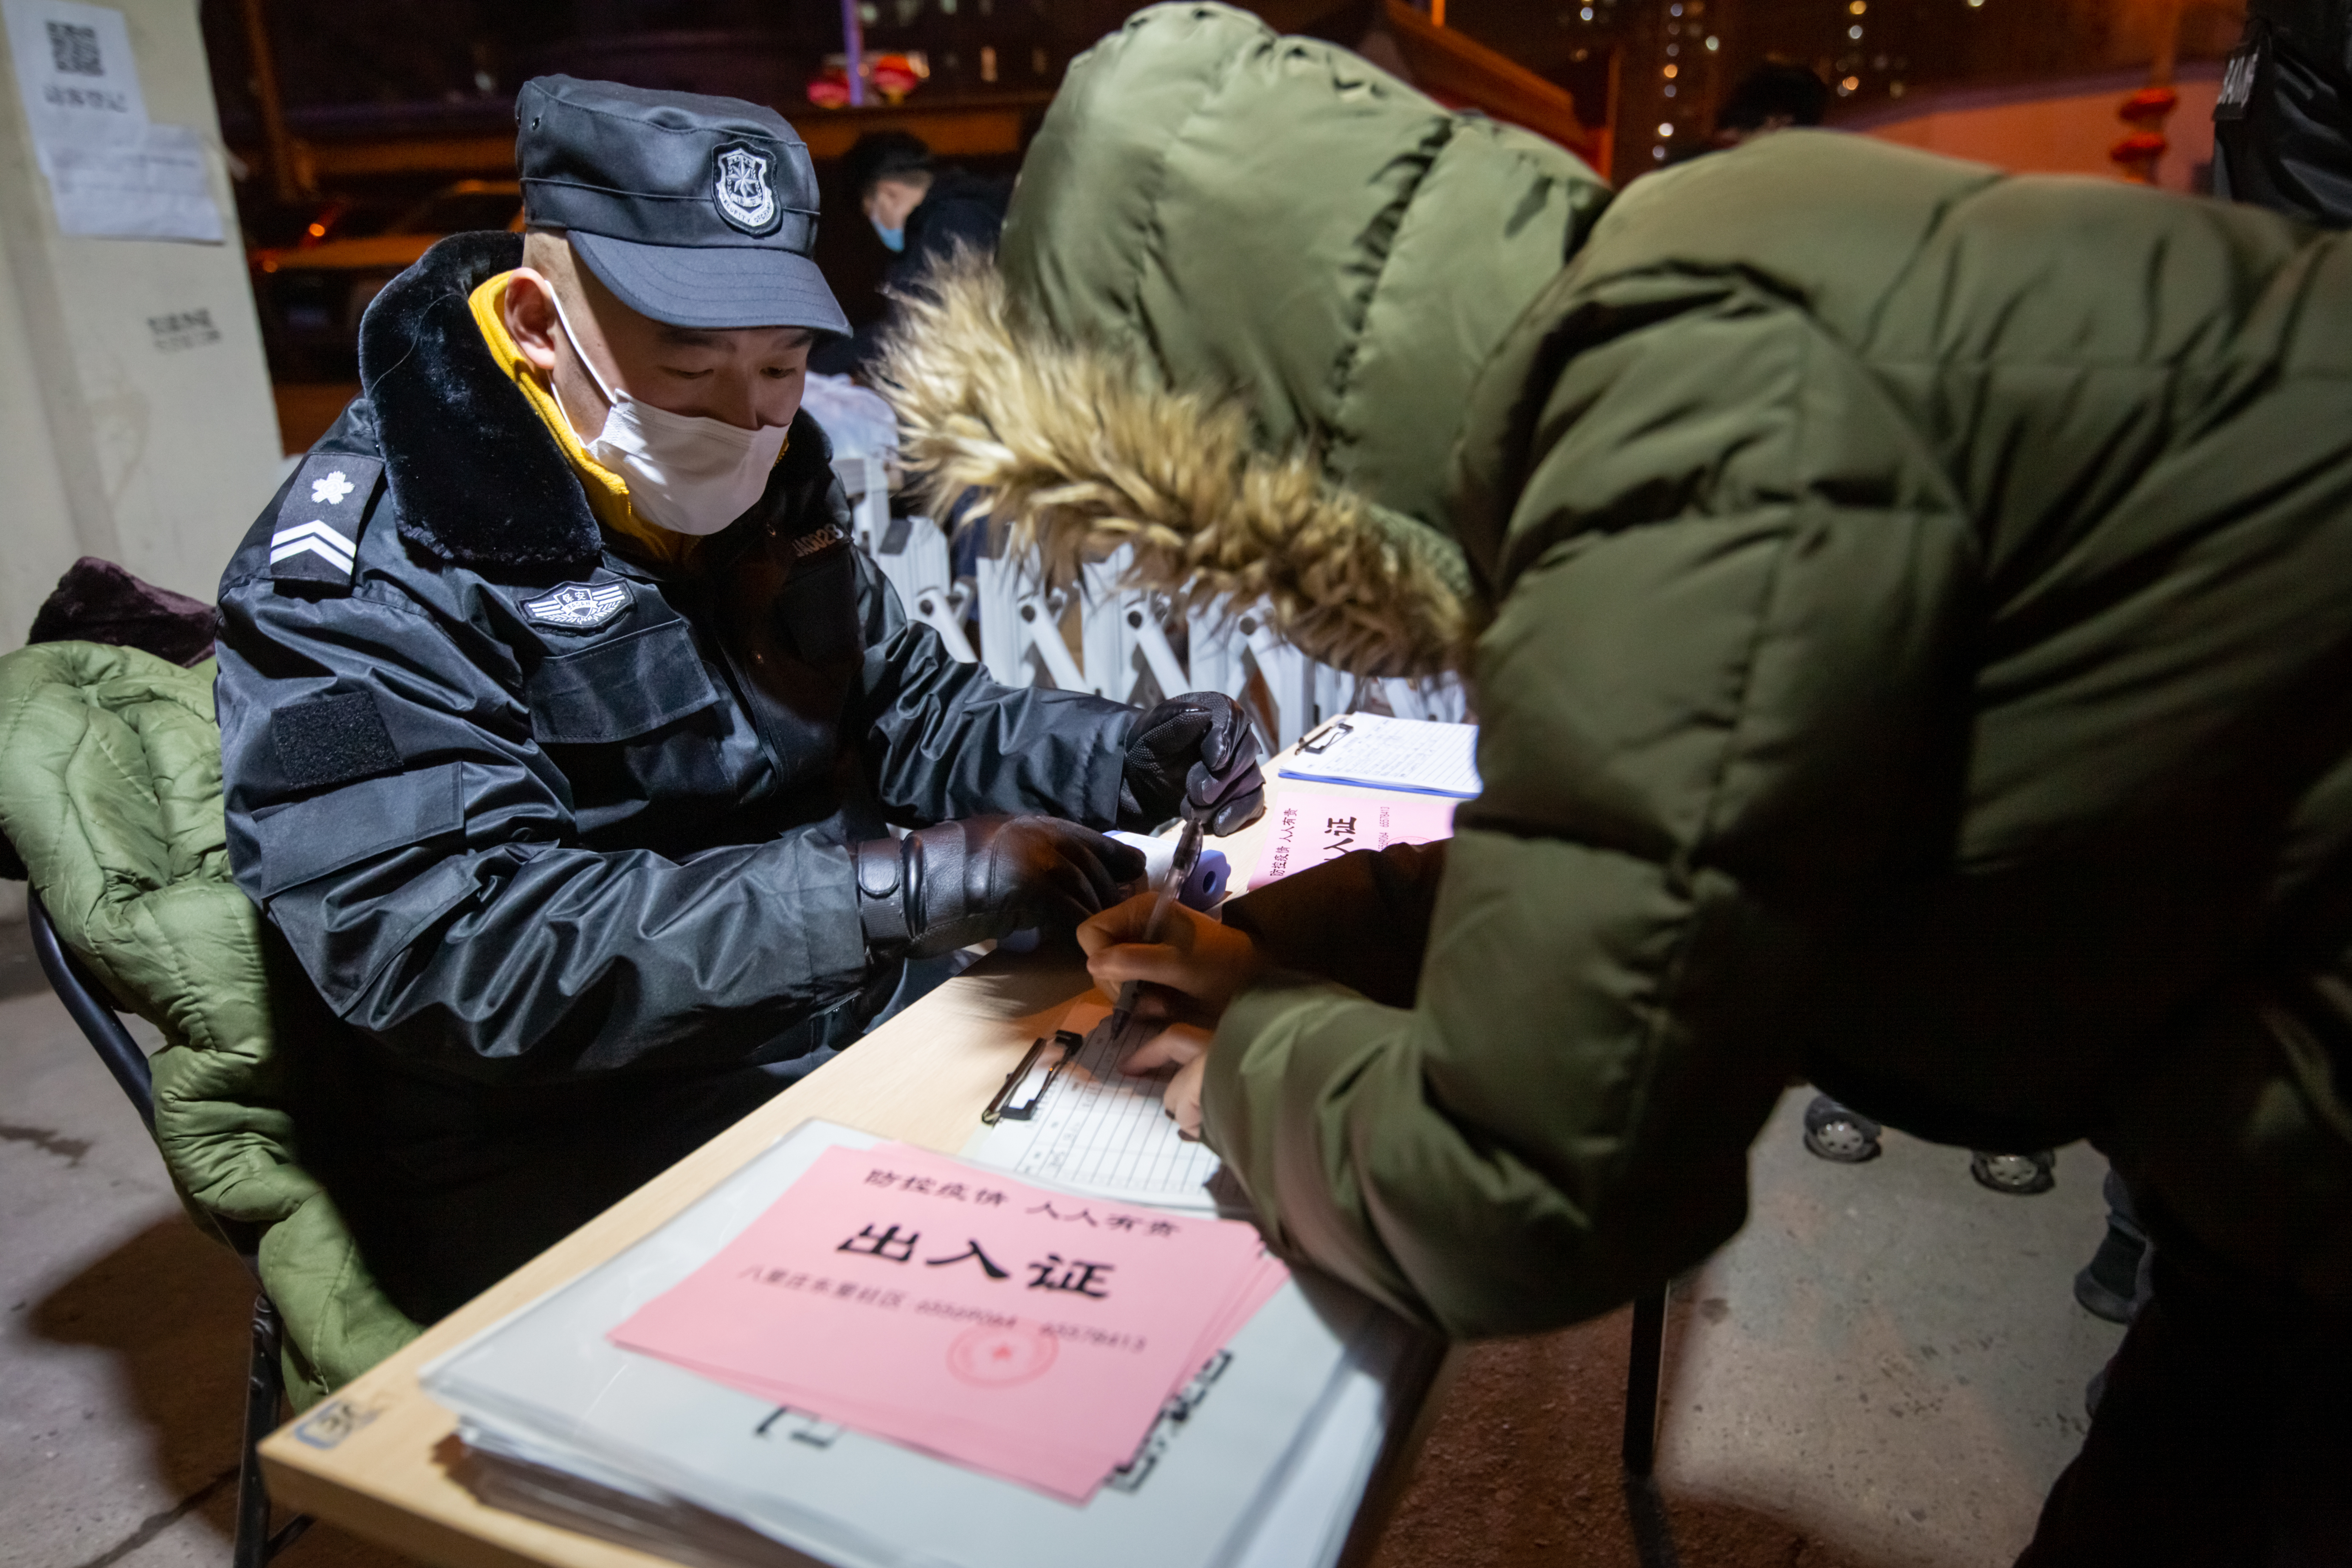 BEIJING, CHINA, FEBRUARY 10, 2020: A security guard operates a checkpoint to record citizens movement, helping control the spread of the COVID-19 virus. By Graeme Nicol, Shutterstock